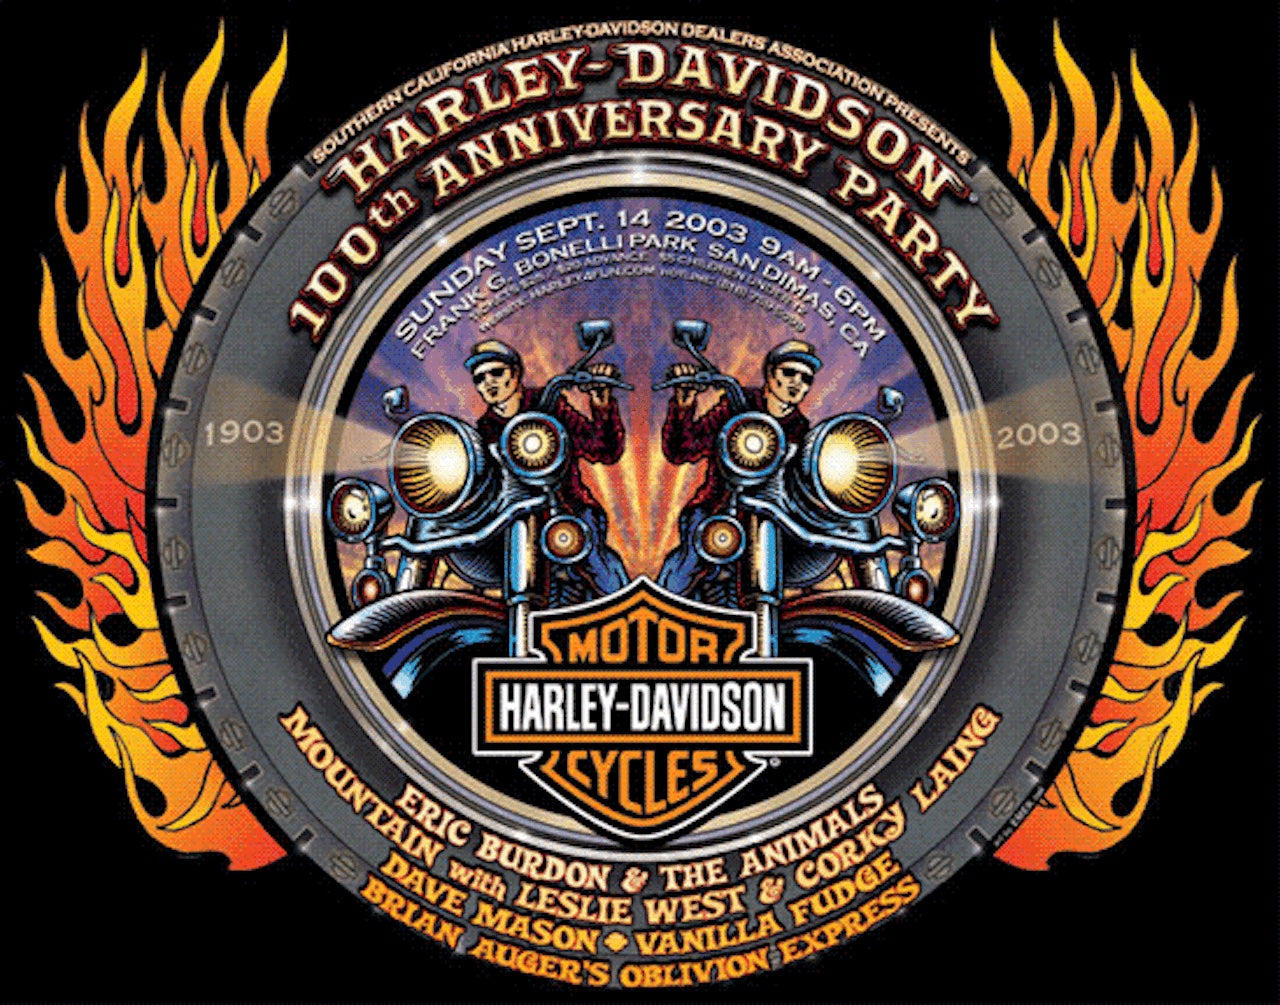 HARLEY DAVIDSON 100th ANNIVERSARY PARTY 03 EMEK – Off The Wall Posters